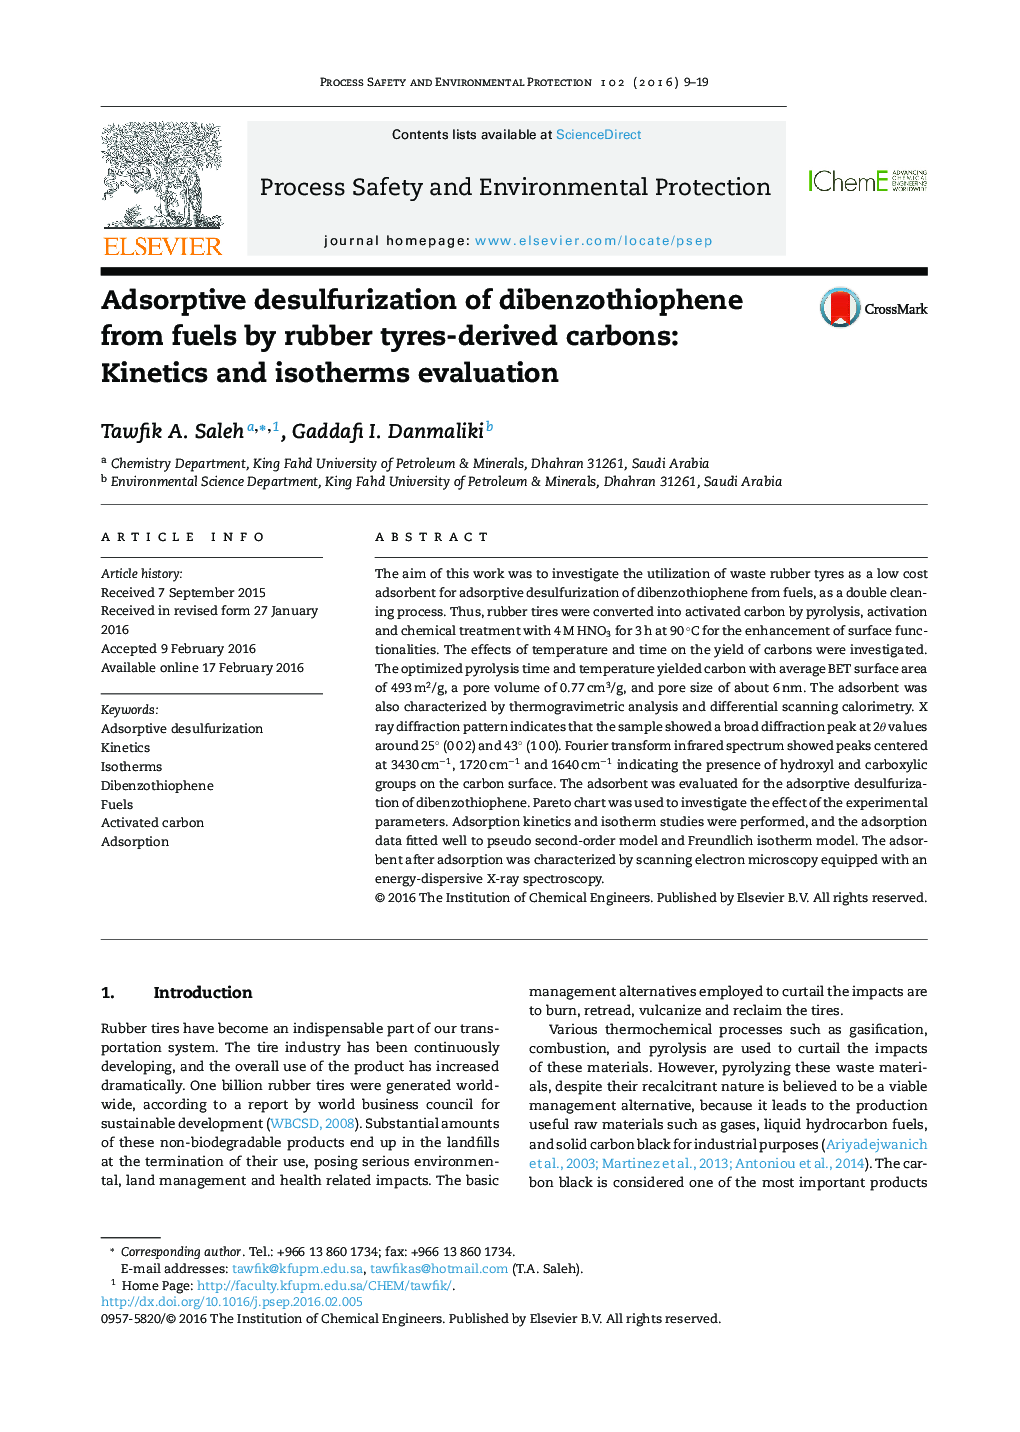 Adsorptive desulfurization of dibenzothiophene from fuels by rubber tyres-derived carbons: Kinetics and isotherms evaluation